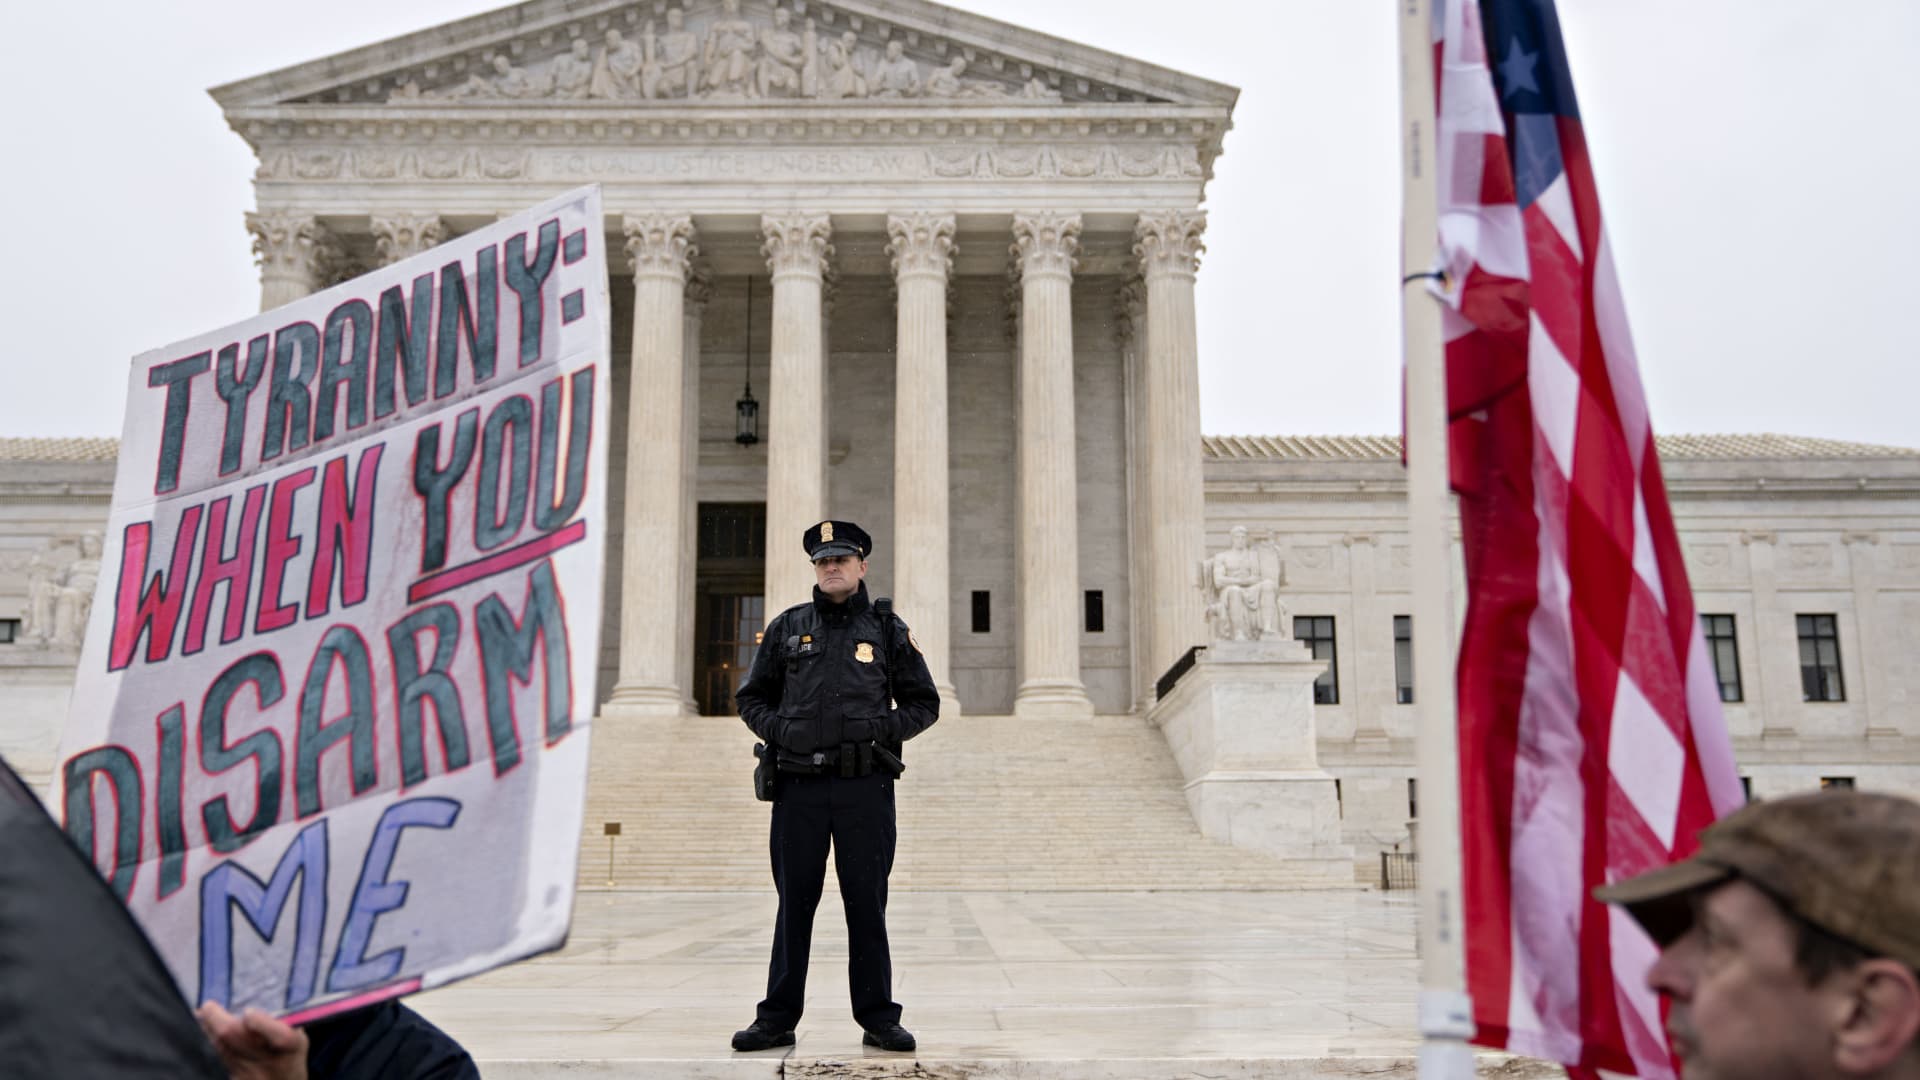 Supreme Court strikes down New York gun law restricting concealed carry